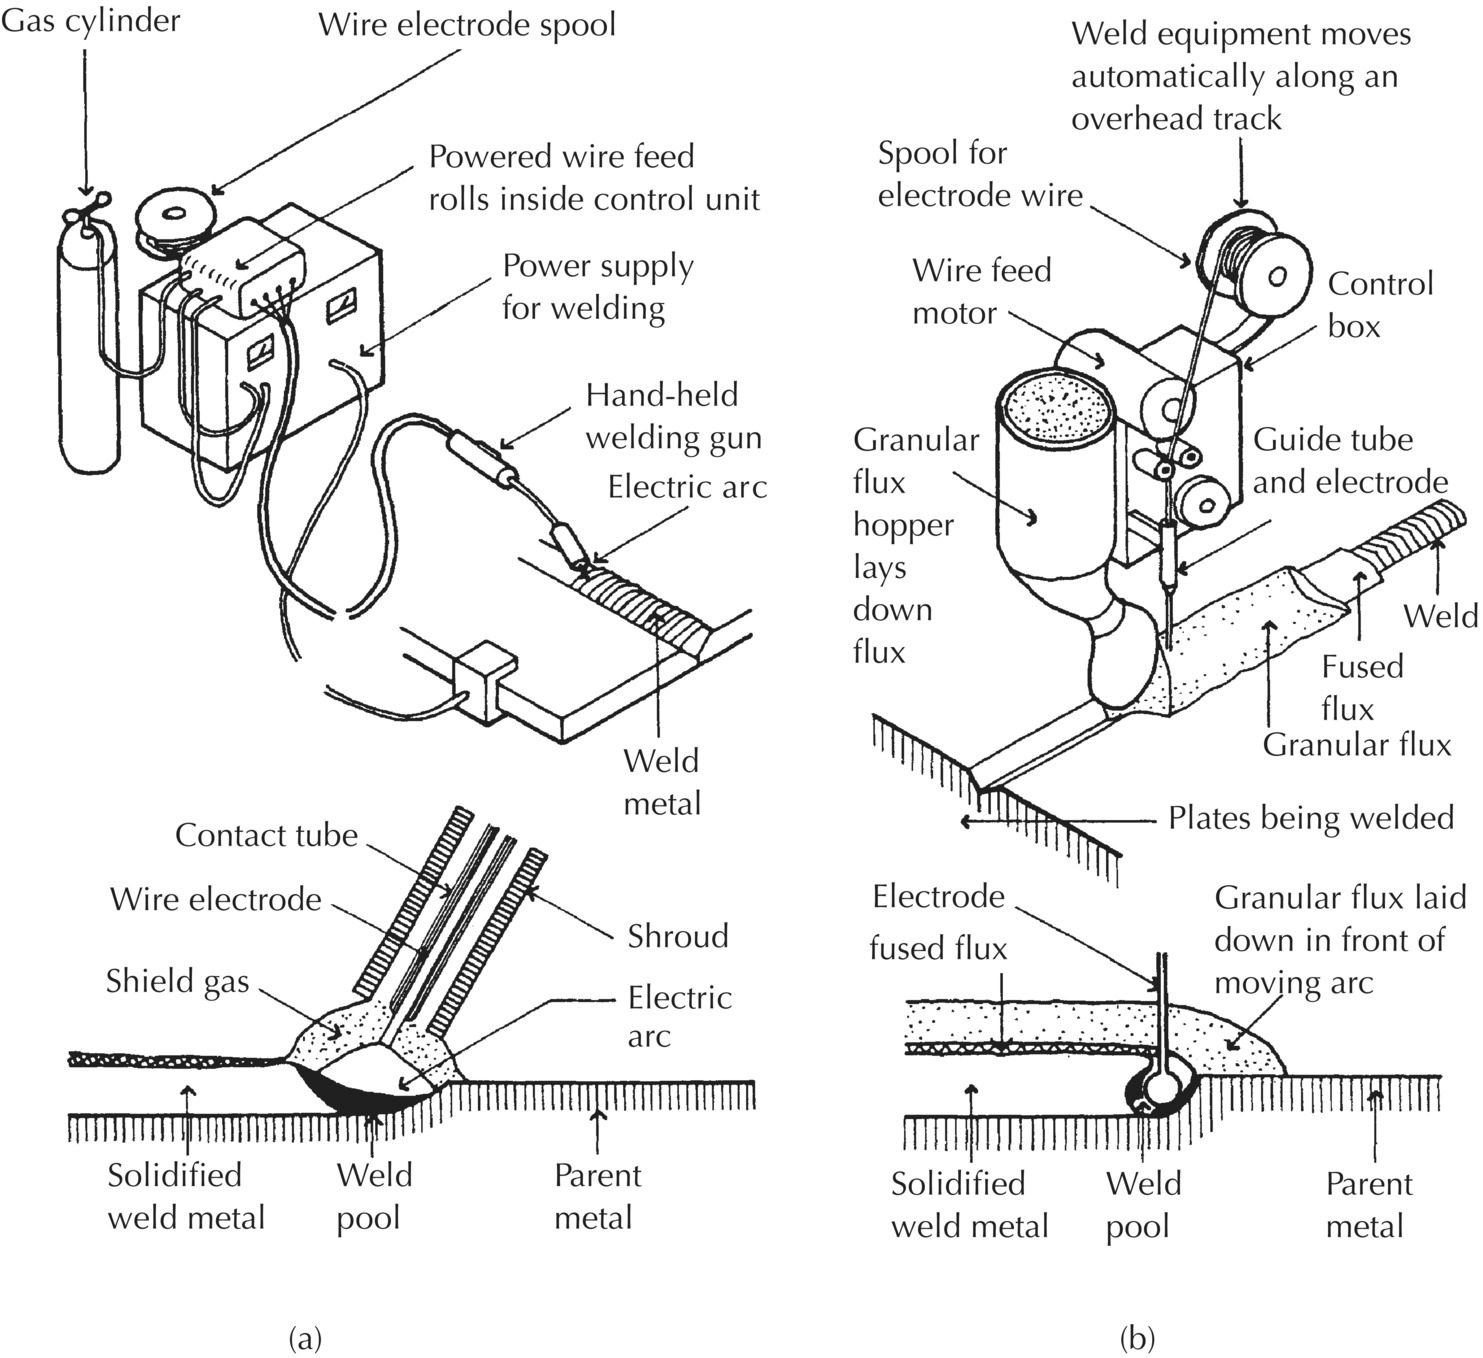 Diagrams of MIG welding with arrows to gas cylinder, wire electrode spool, weld metal, etc. (left) and automatic SA welding with arrows to spool for electrode wire, wire feed motor, etc. (right).